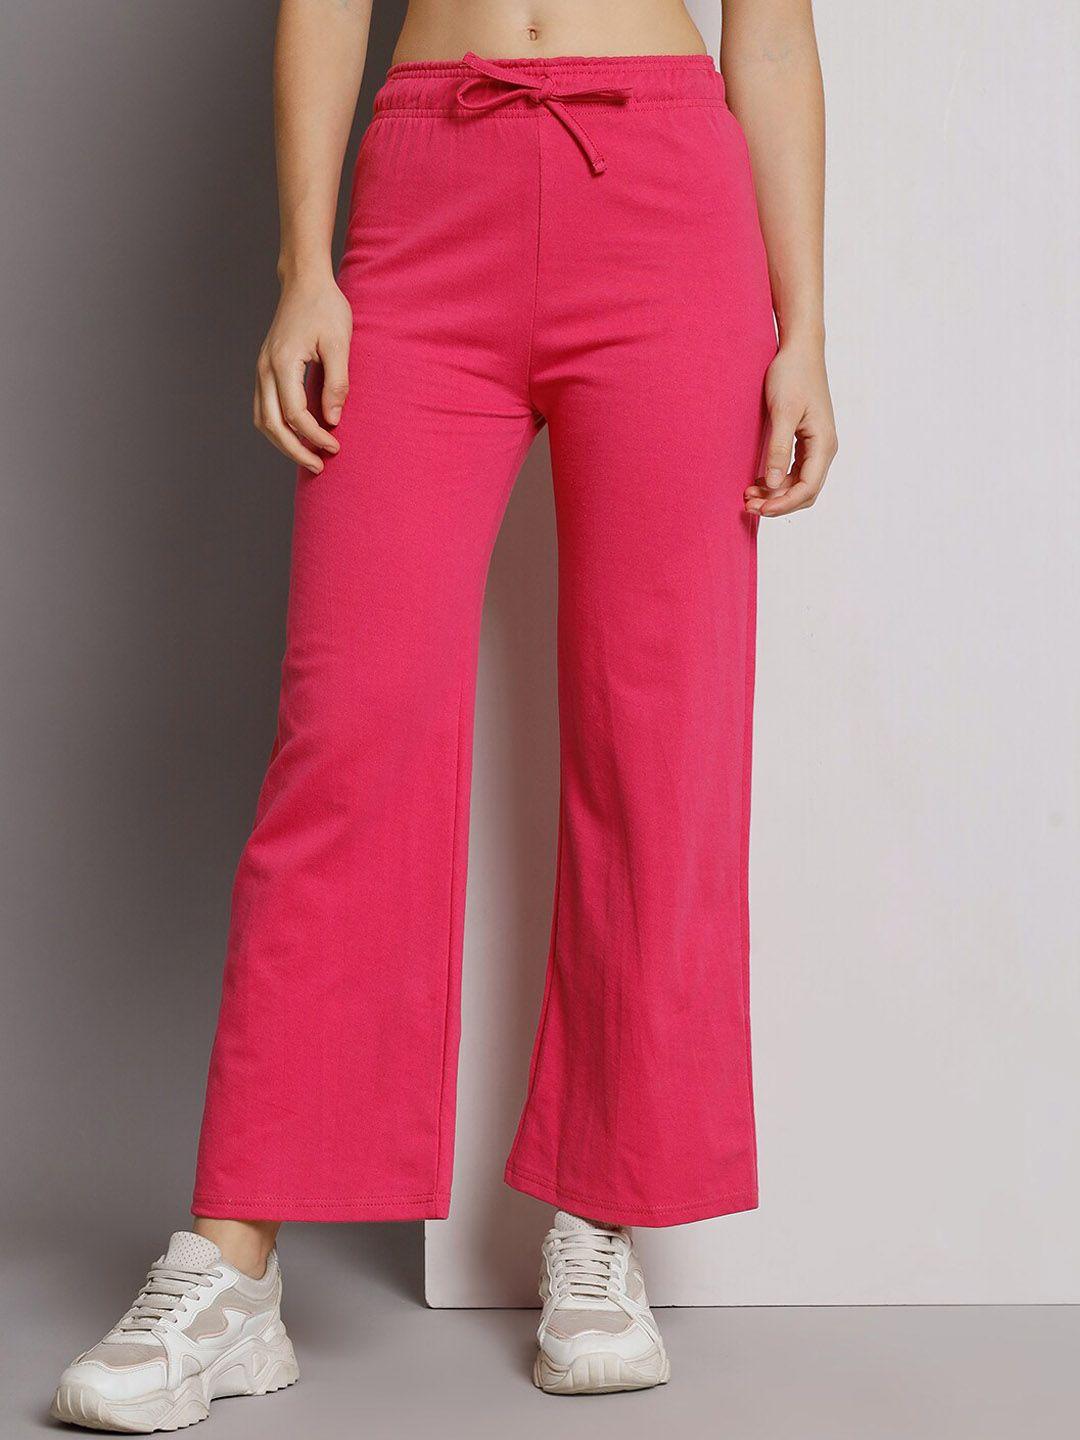 q-rious mid-rise relaxed fit track pants